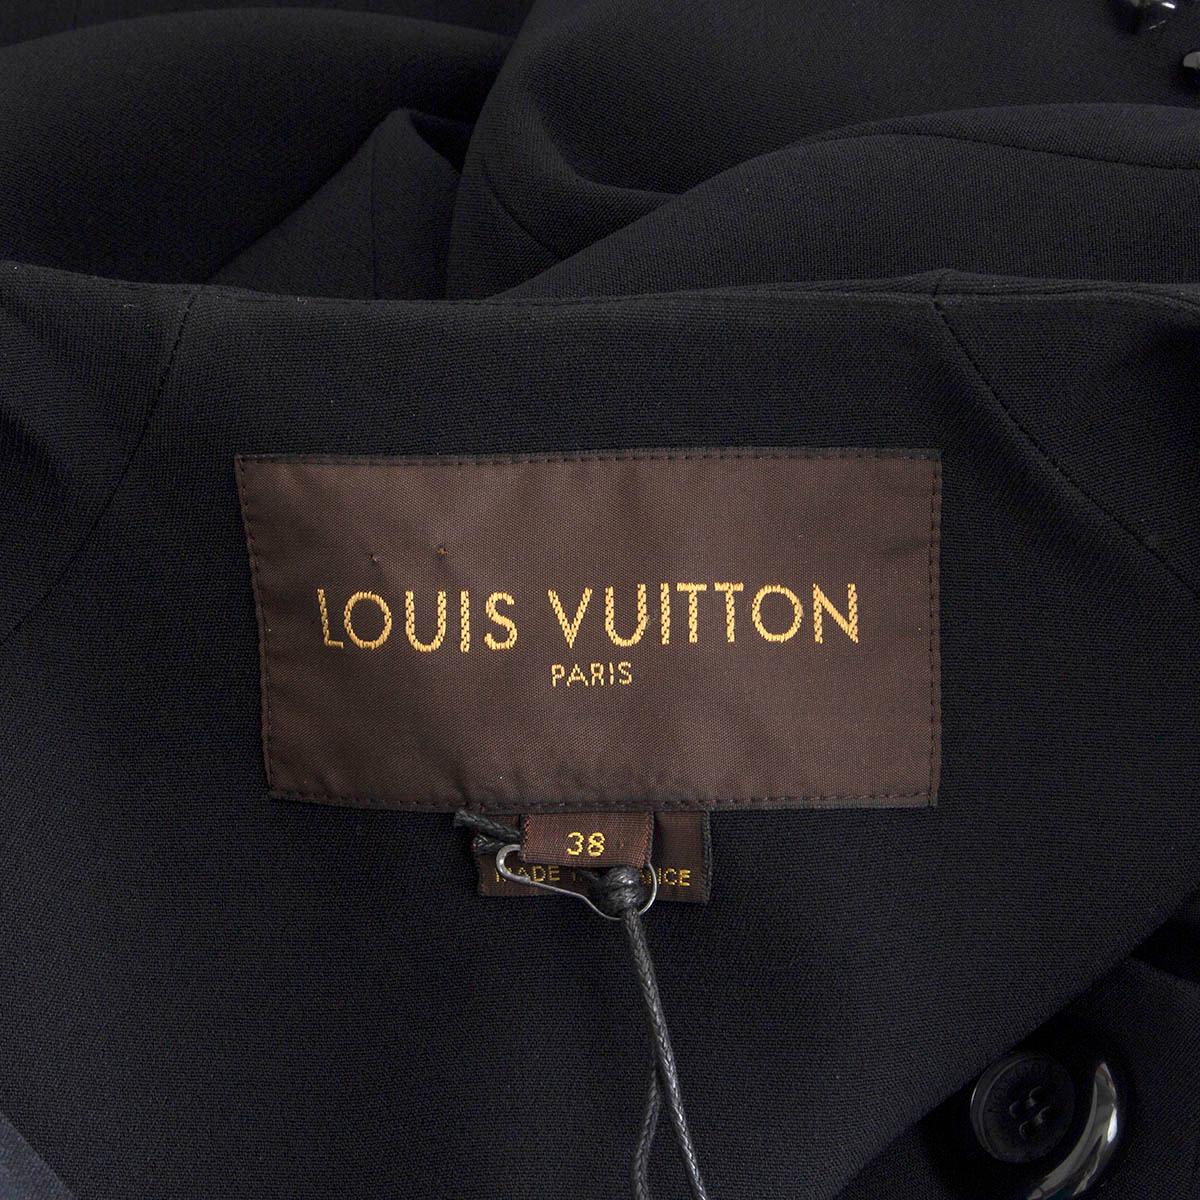 LOUIS VUITTON black acetate BEADED CUT OUT Coat Jacket 38 S In Excellent Condition For Sale In Zürich, CH